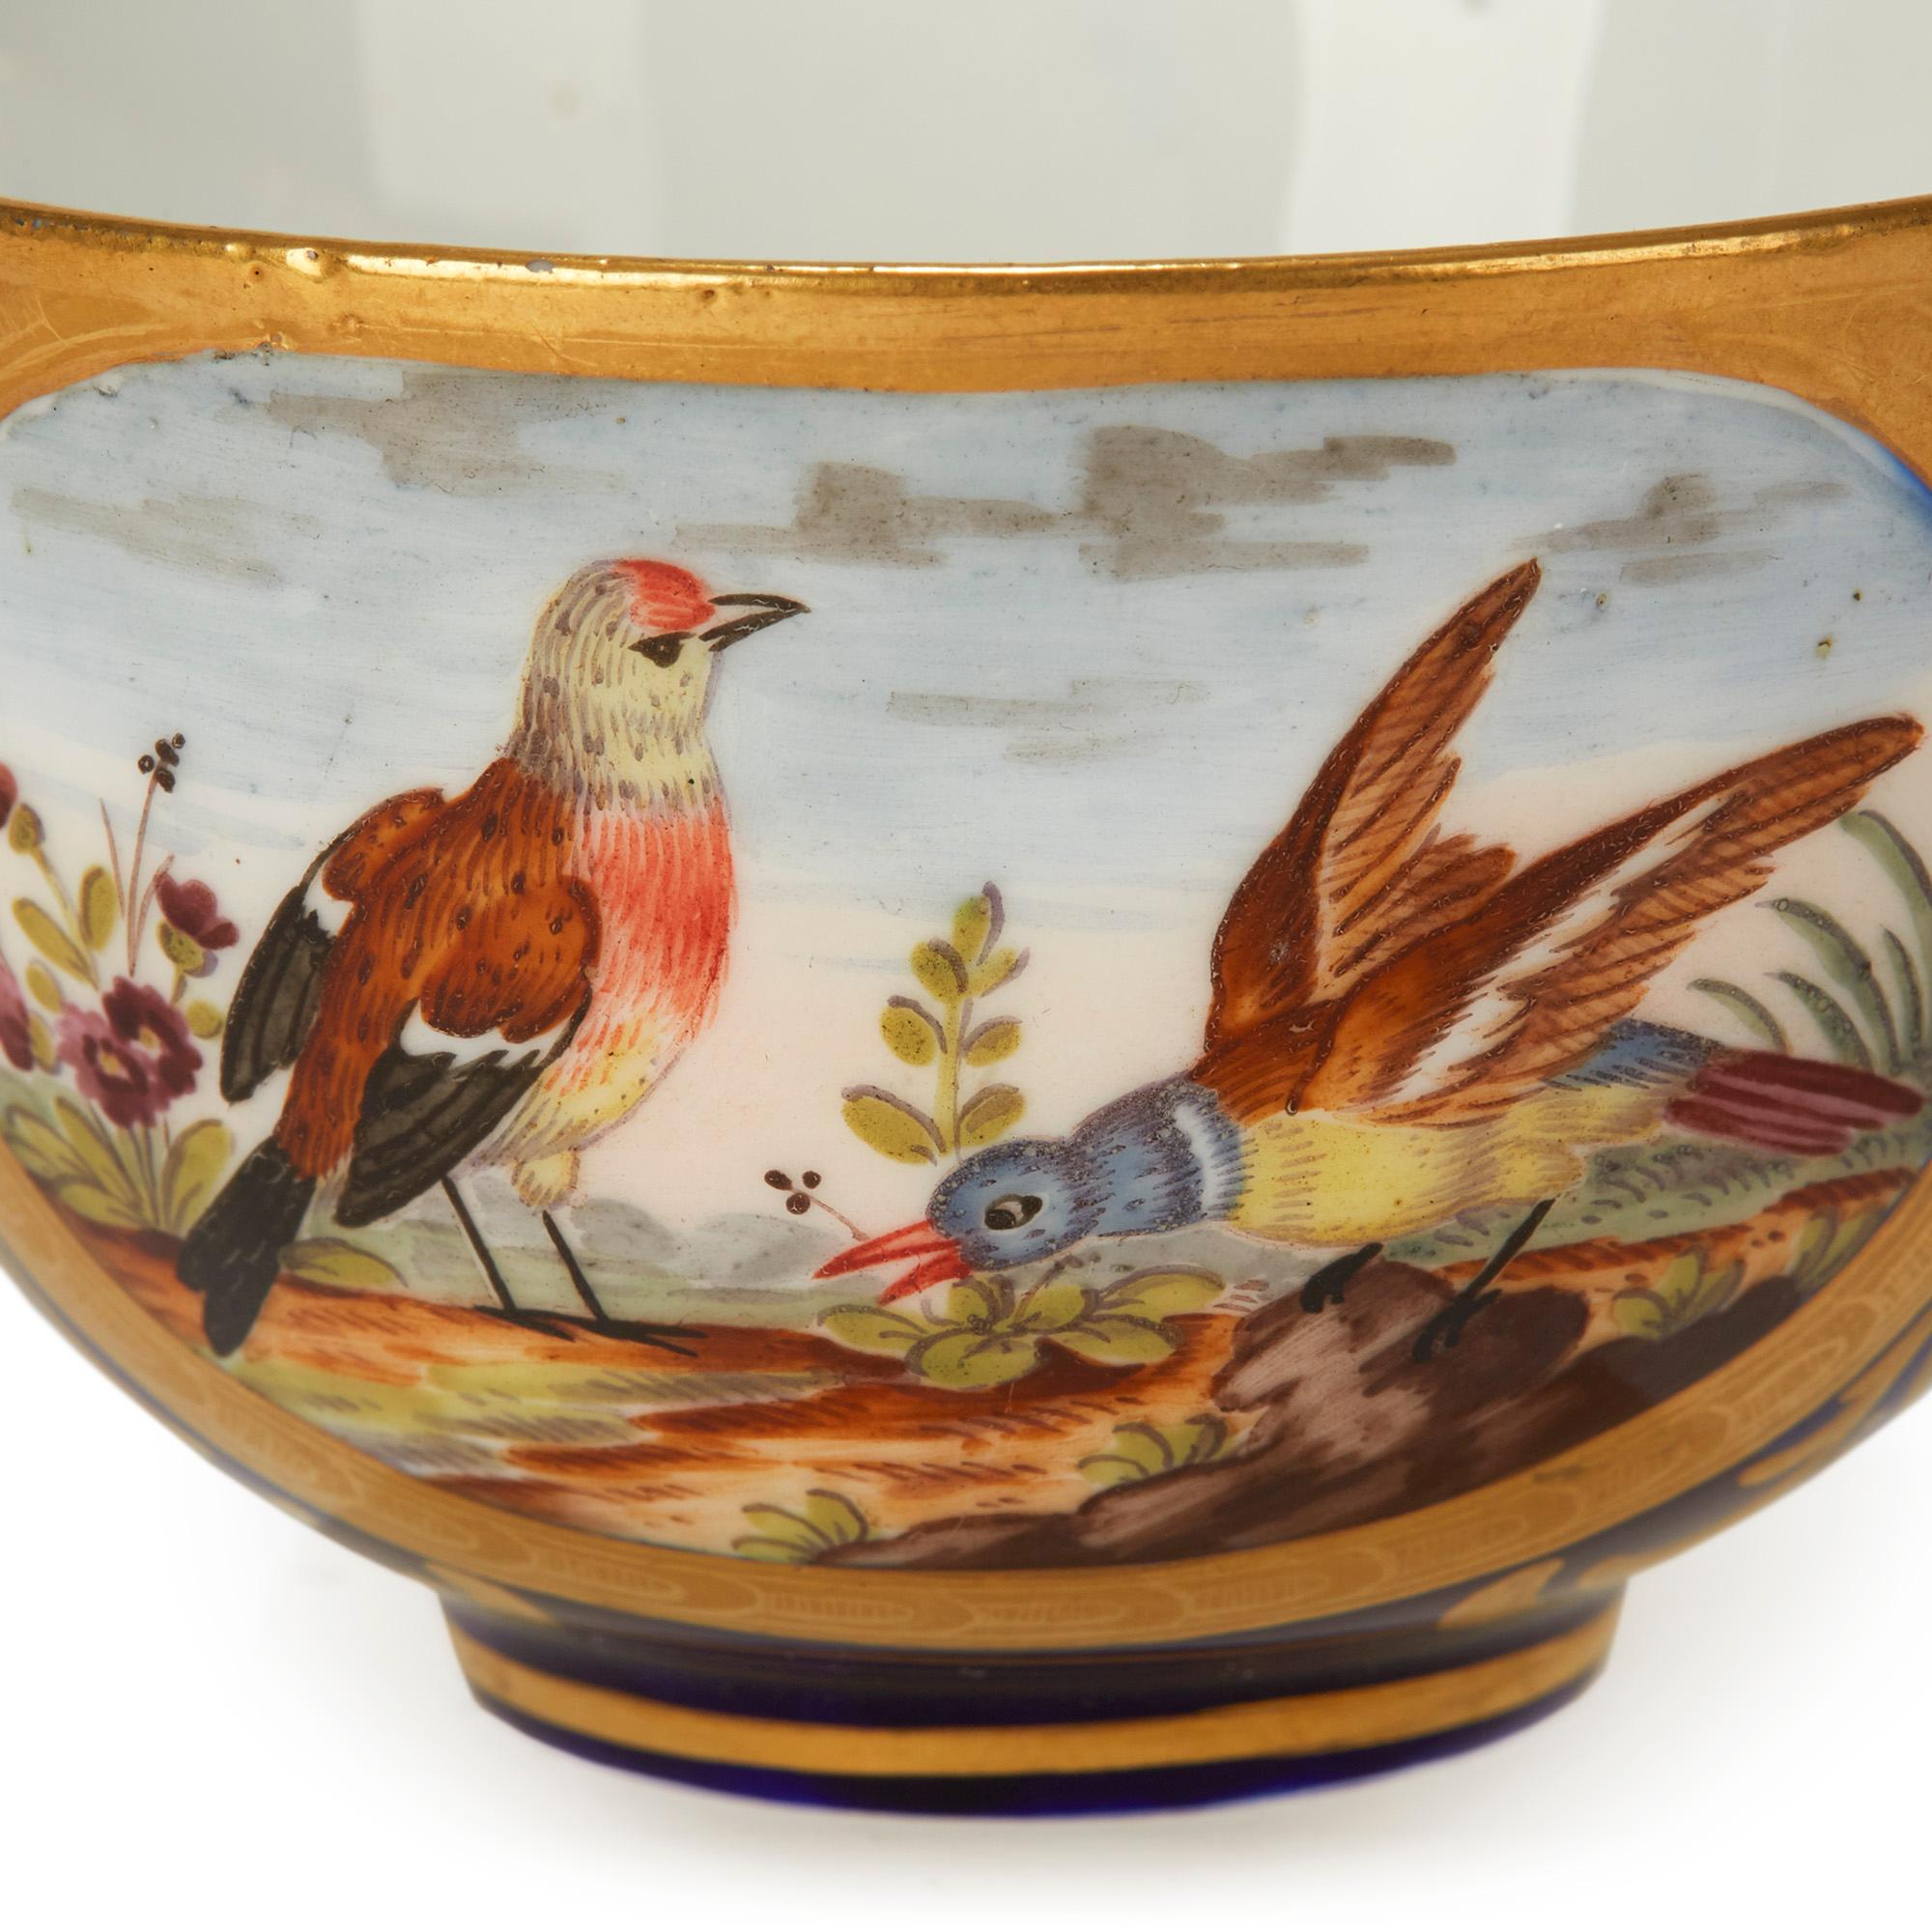 Louis XVI Sèvres French Porcelain Hand Painted Teacup and Saucer with Bird Scenes, 1791 For Sale